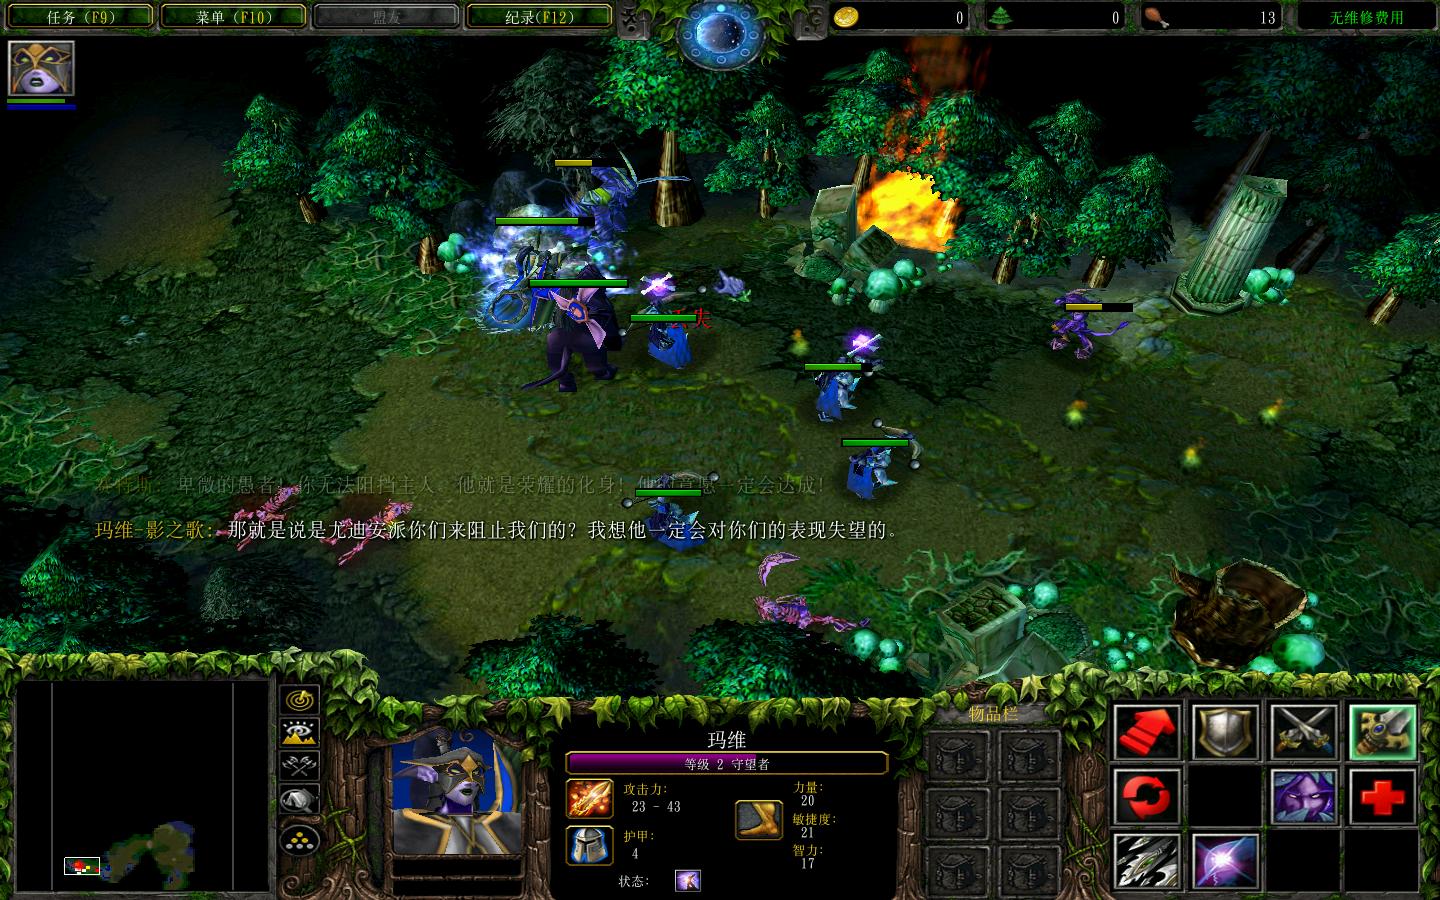 ħ3Warcraft III The Frozen Thronev1.24˹ʹv6.0